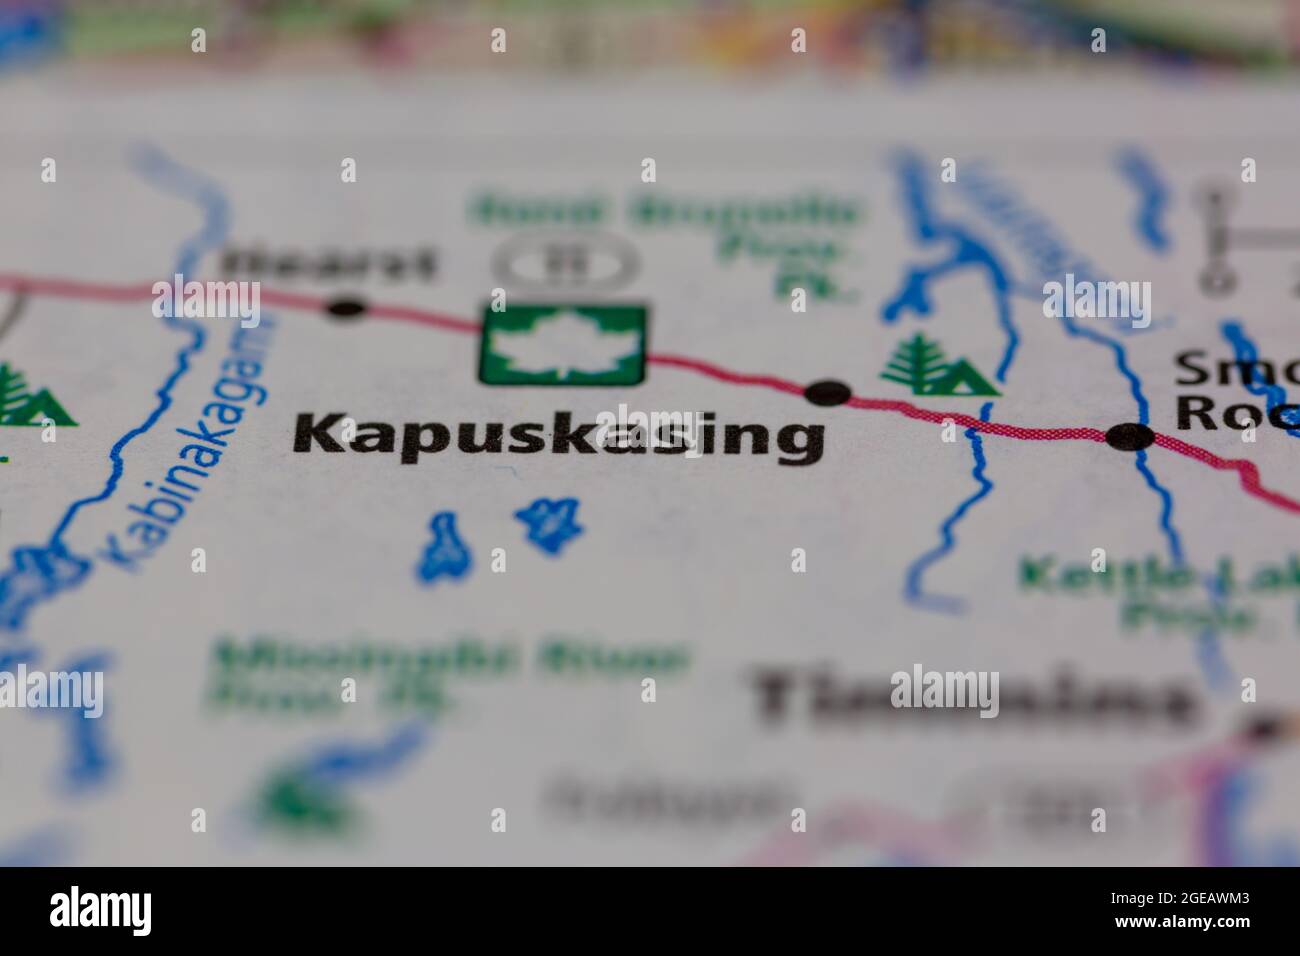 Kapuskasing Ontario Canada shown on a road map or Geography map Stock Photo